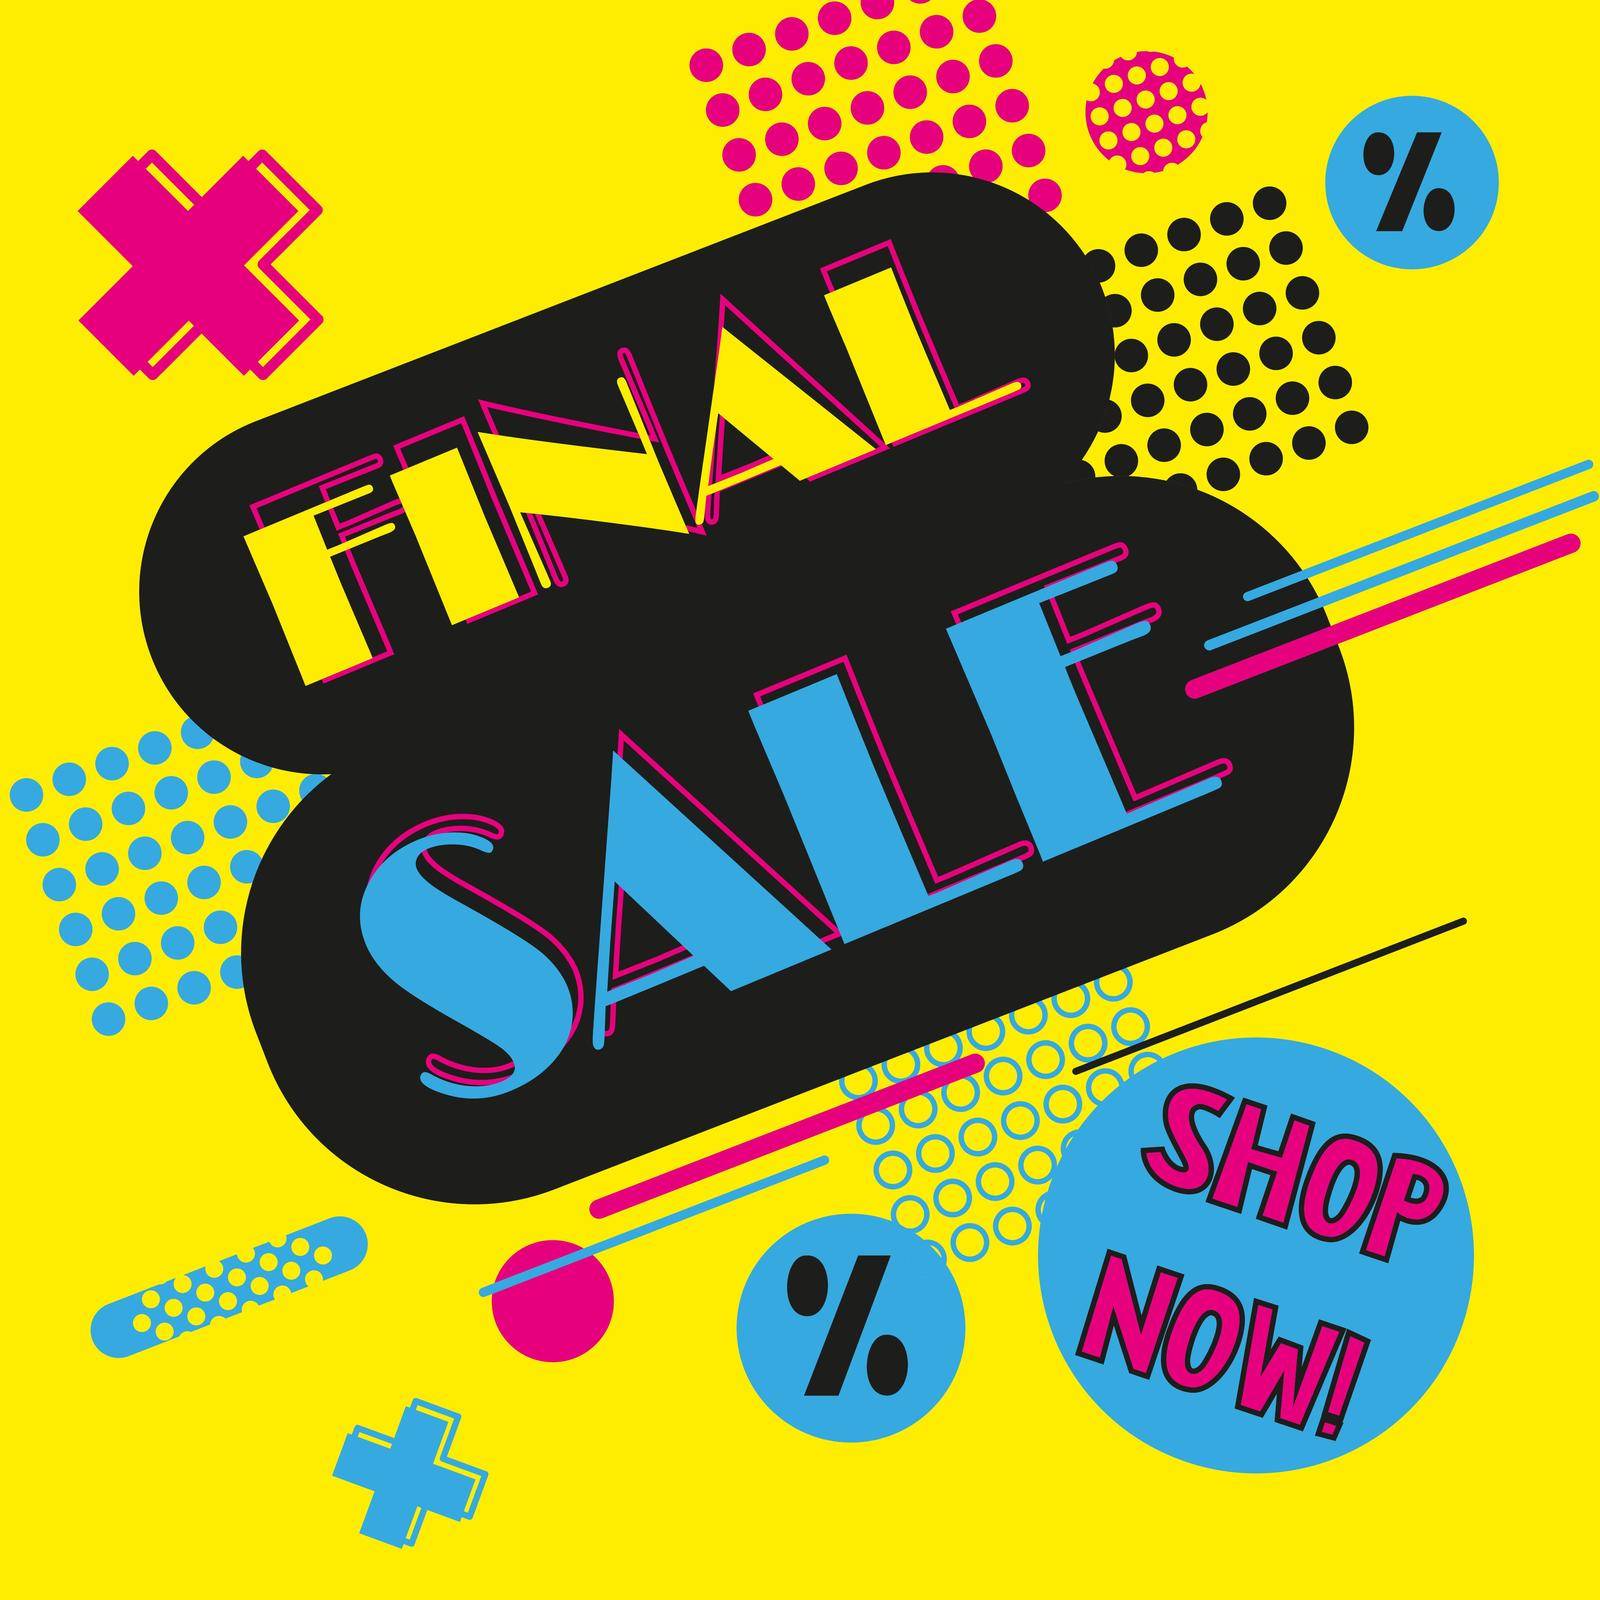 Final Sale banner. Sale offer price sign. Brush vector banner. Discount text. Vector Offers Discounts Up Shopping Background Label by Frutlower